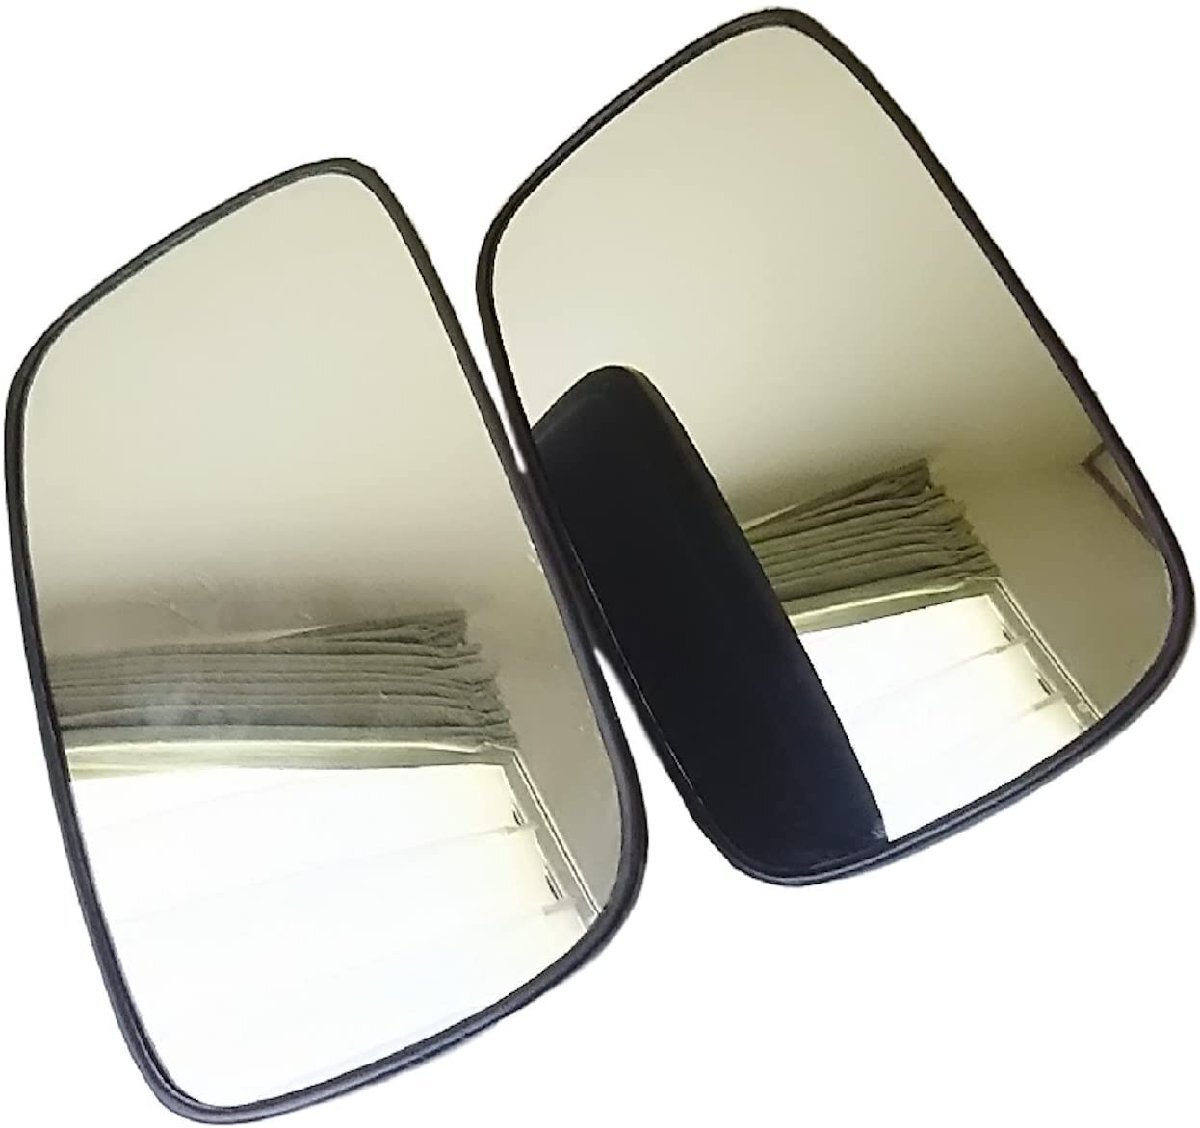 384* limitation special price * all-purpose extra-large forklift tractor side mirror rearview mirror 2 piece set 31cm × 17cm large heavy equipment agriculture machine building machine etc. 